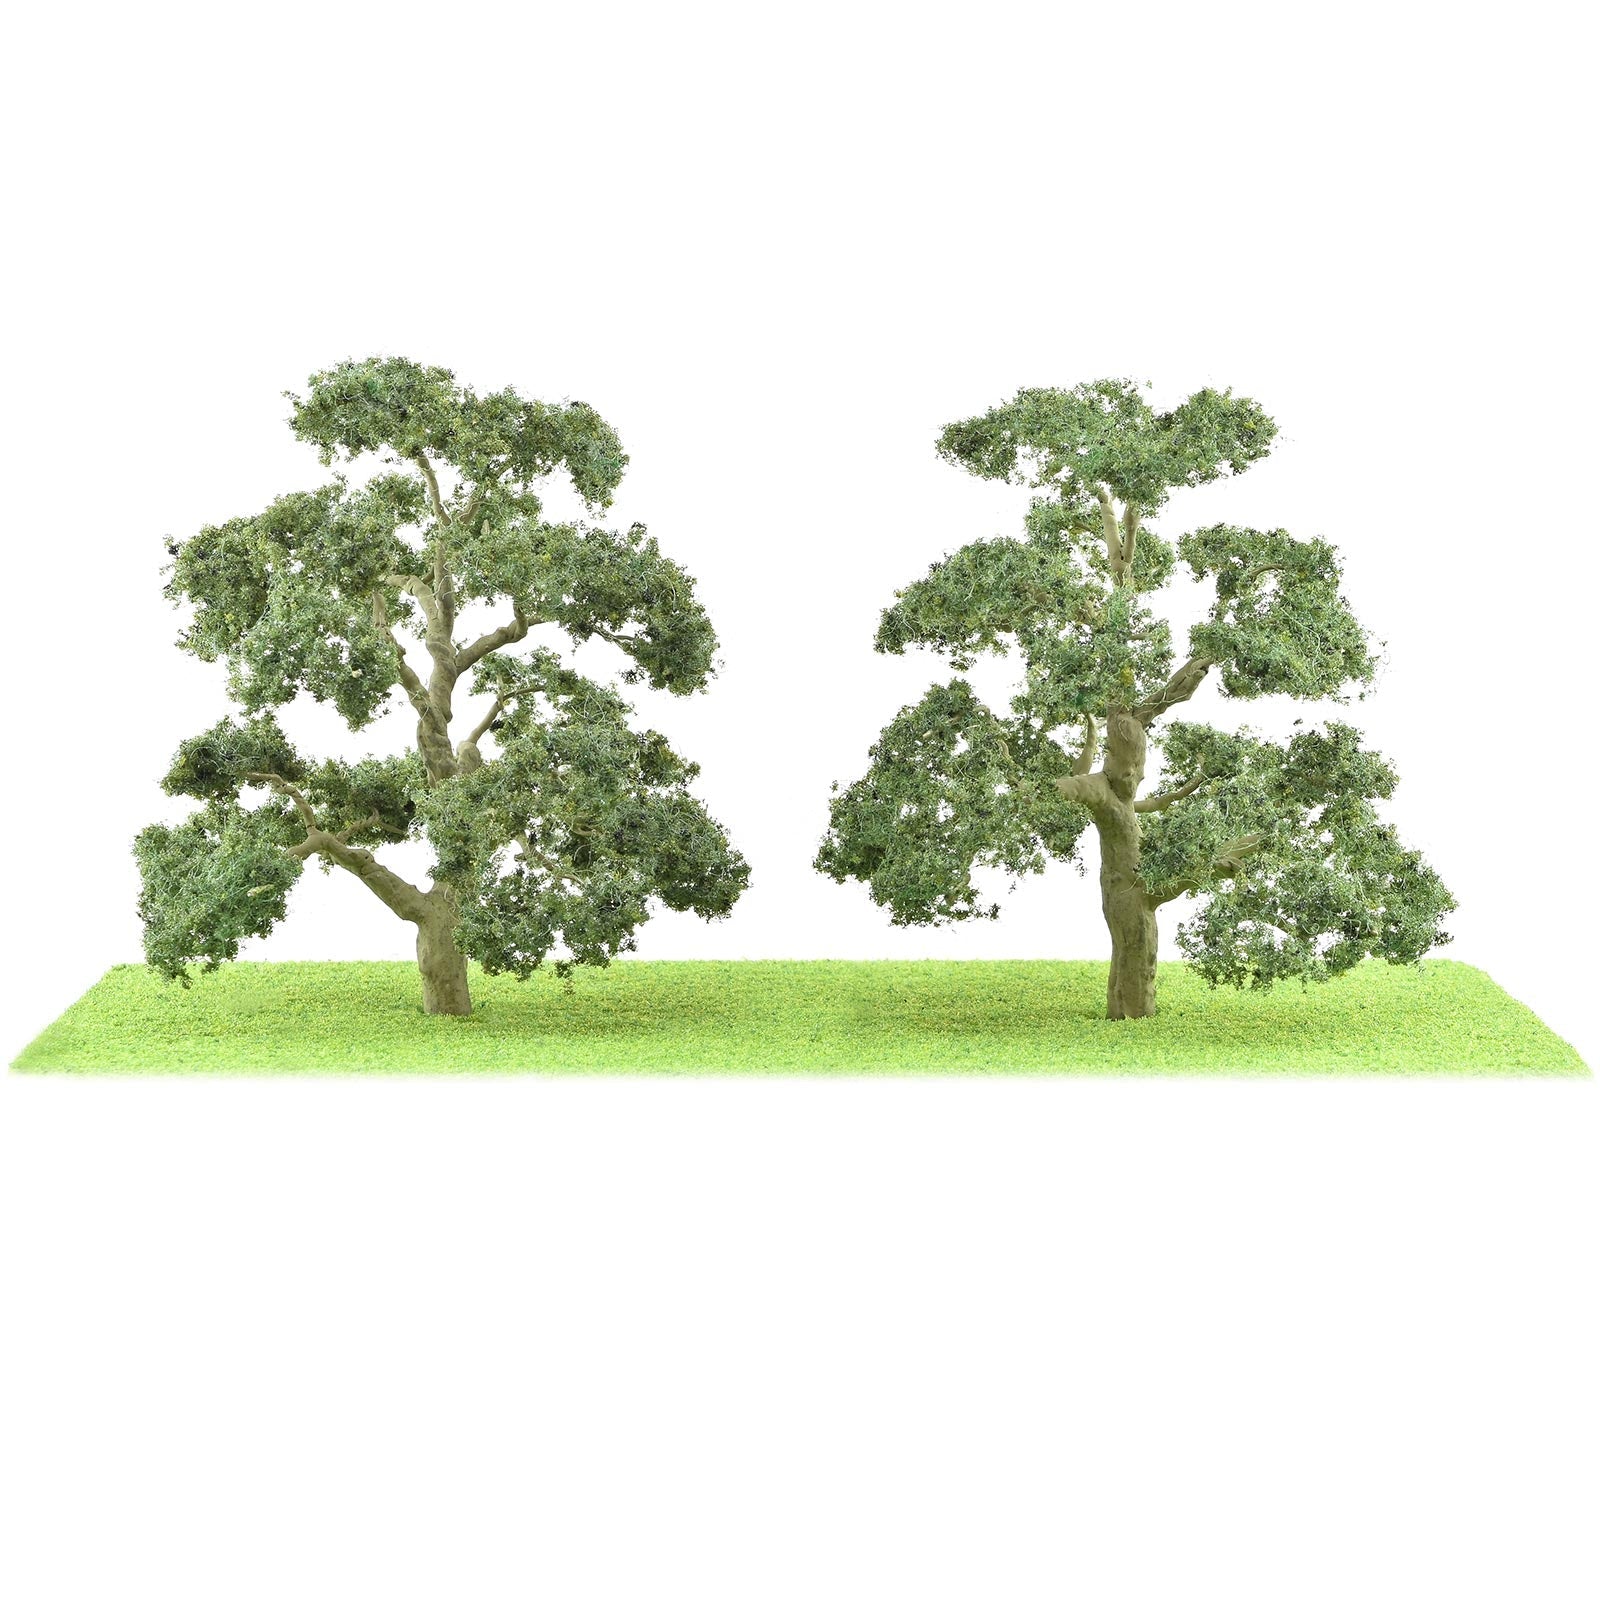 JTT Scenery Products Oak Tree Grove 3 - 3 1/2" High, 6 Pieces